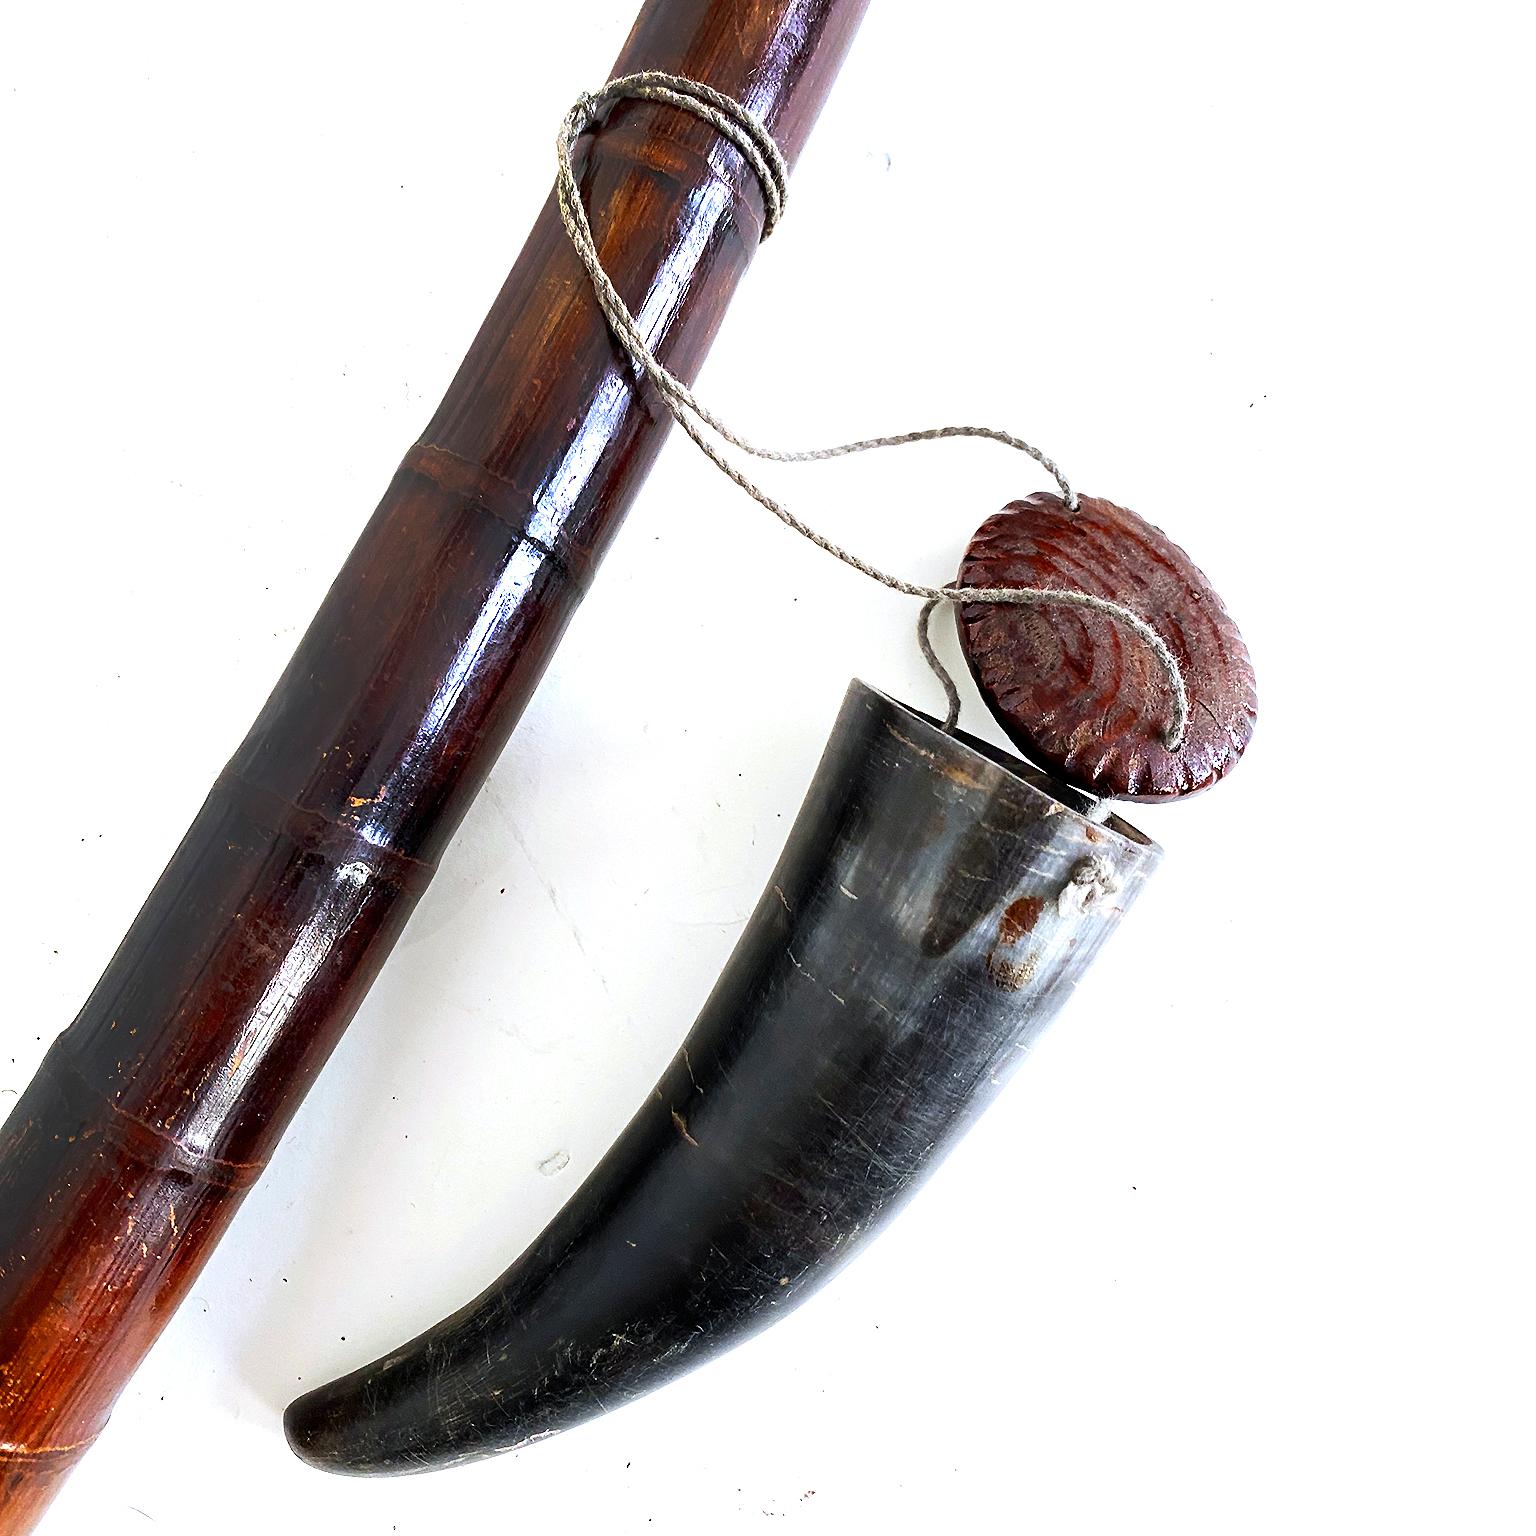 Vintage long bamboo pipe with horn tobacco container, Chinese, 20th century.

Very long black bamboo pole fashioned into a pipe with the root constructed into a bowl covered with brass and copper held on with steel knobs. Accompanied by a horn